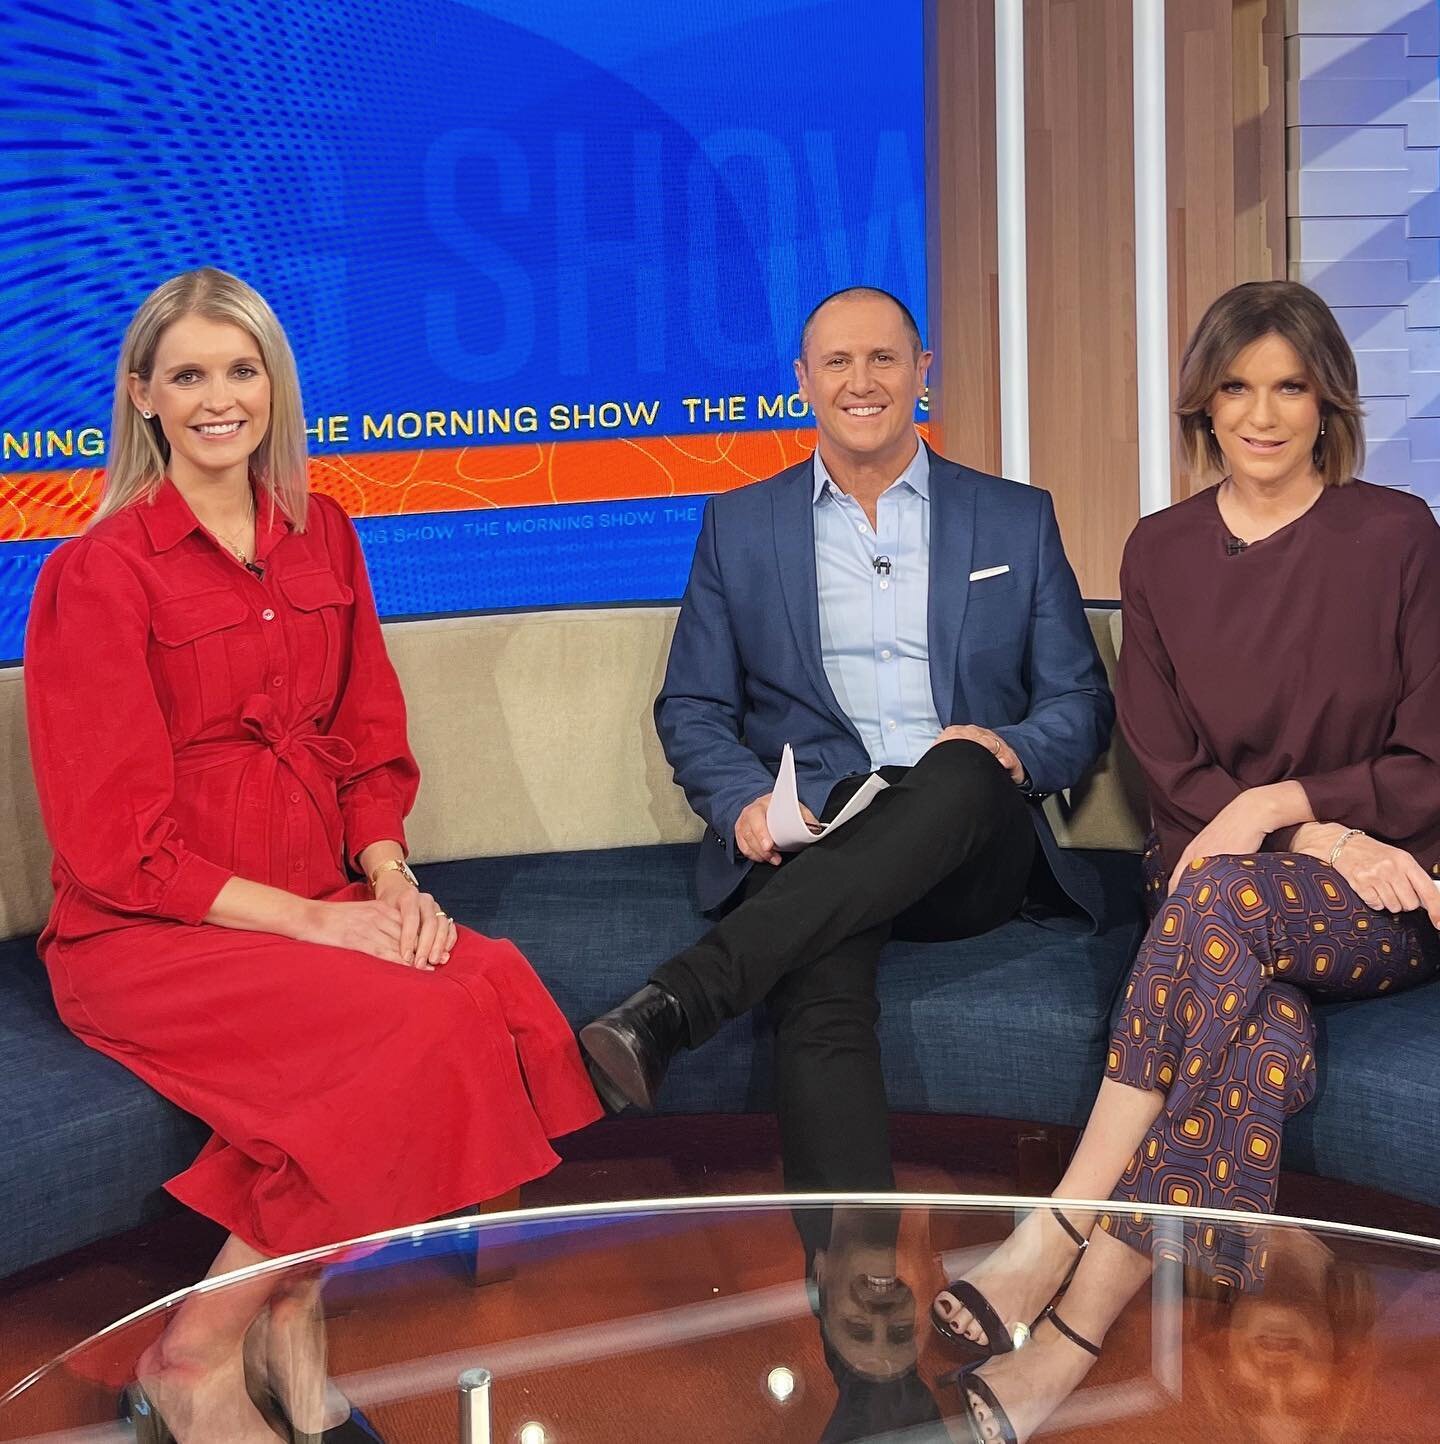 Talking gut health and mental health this morning on @morningshowon7 with @kyliegillies and @larryemdur. 
⁣
Both gut health and mental health are VERY complex topics - I could talk for hours! ⁣
But in the interest keeping it very simple (and IG chara